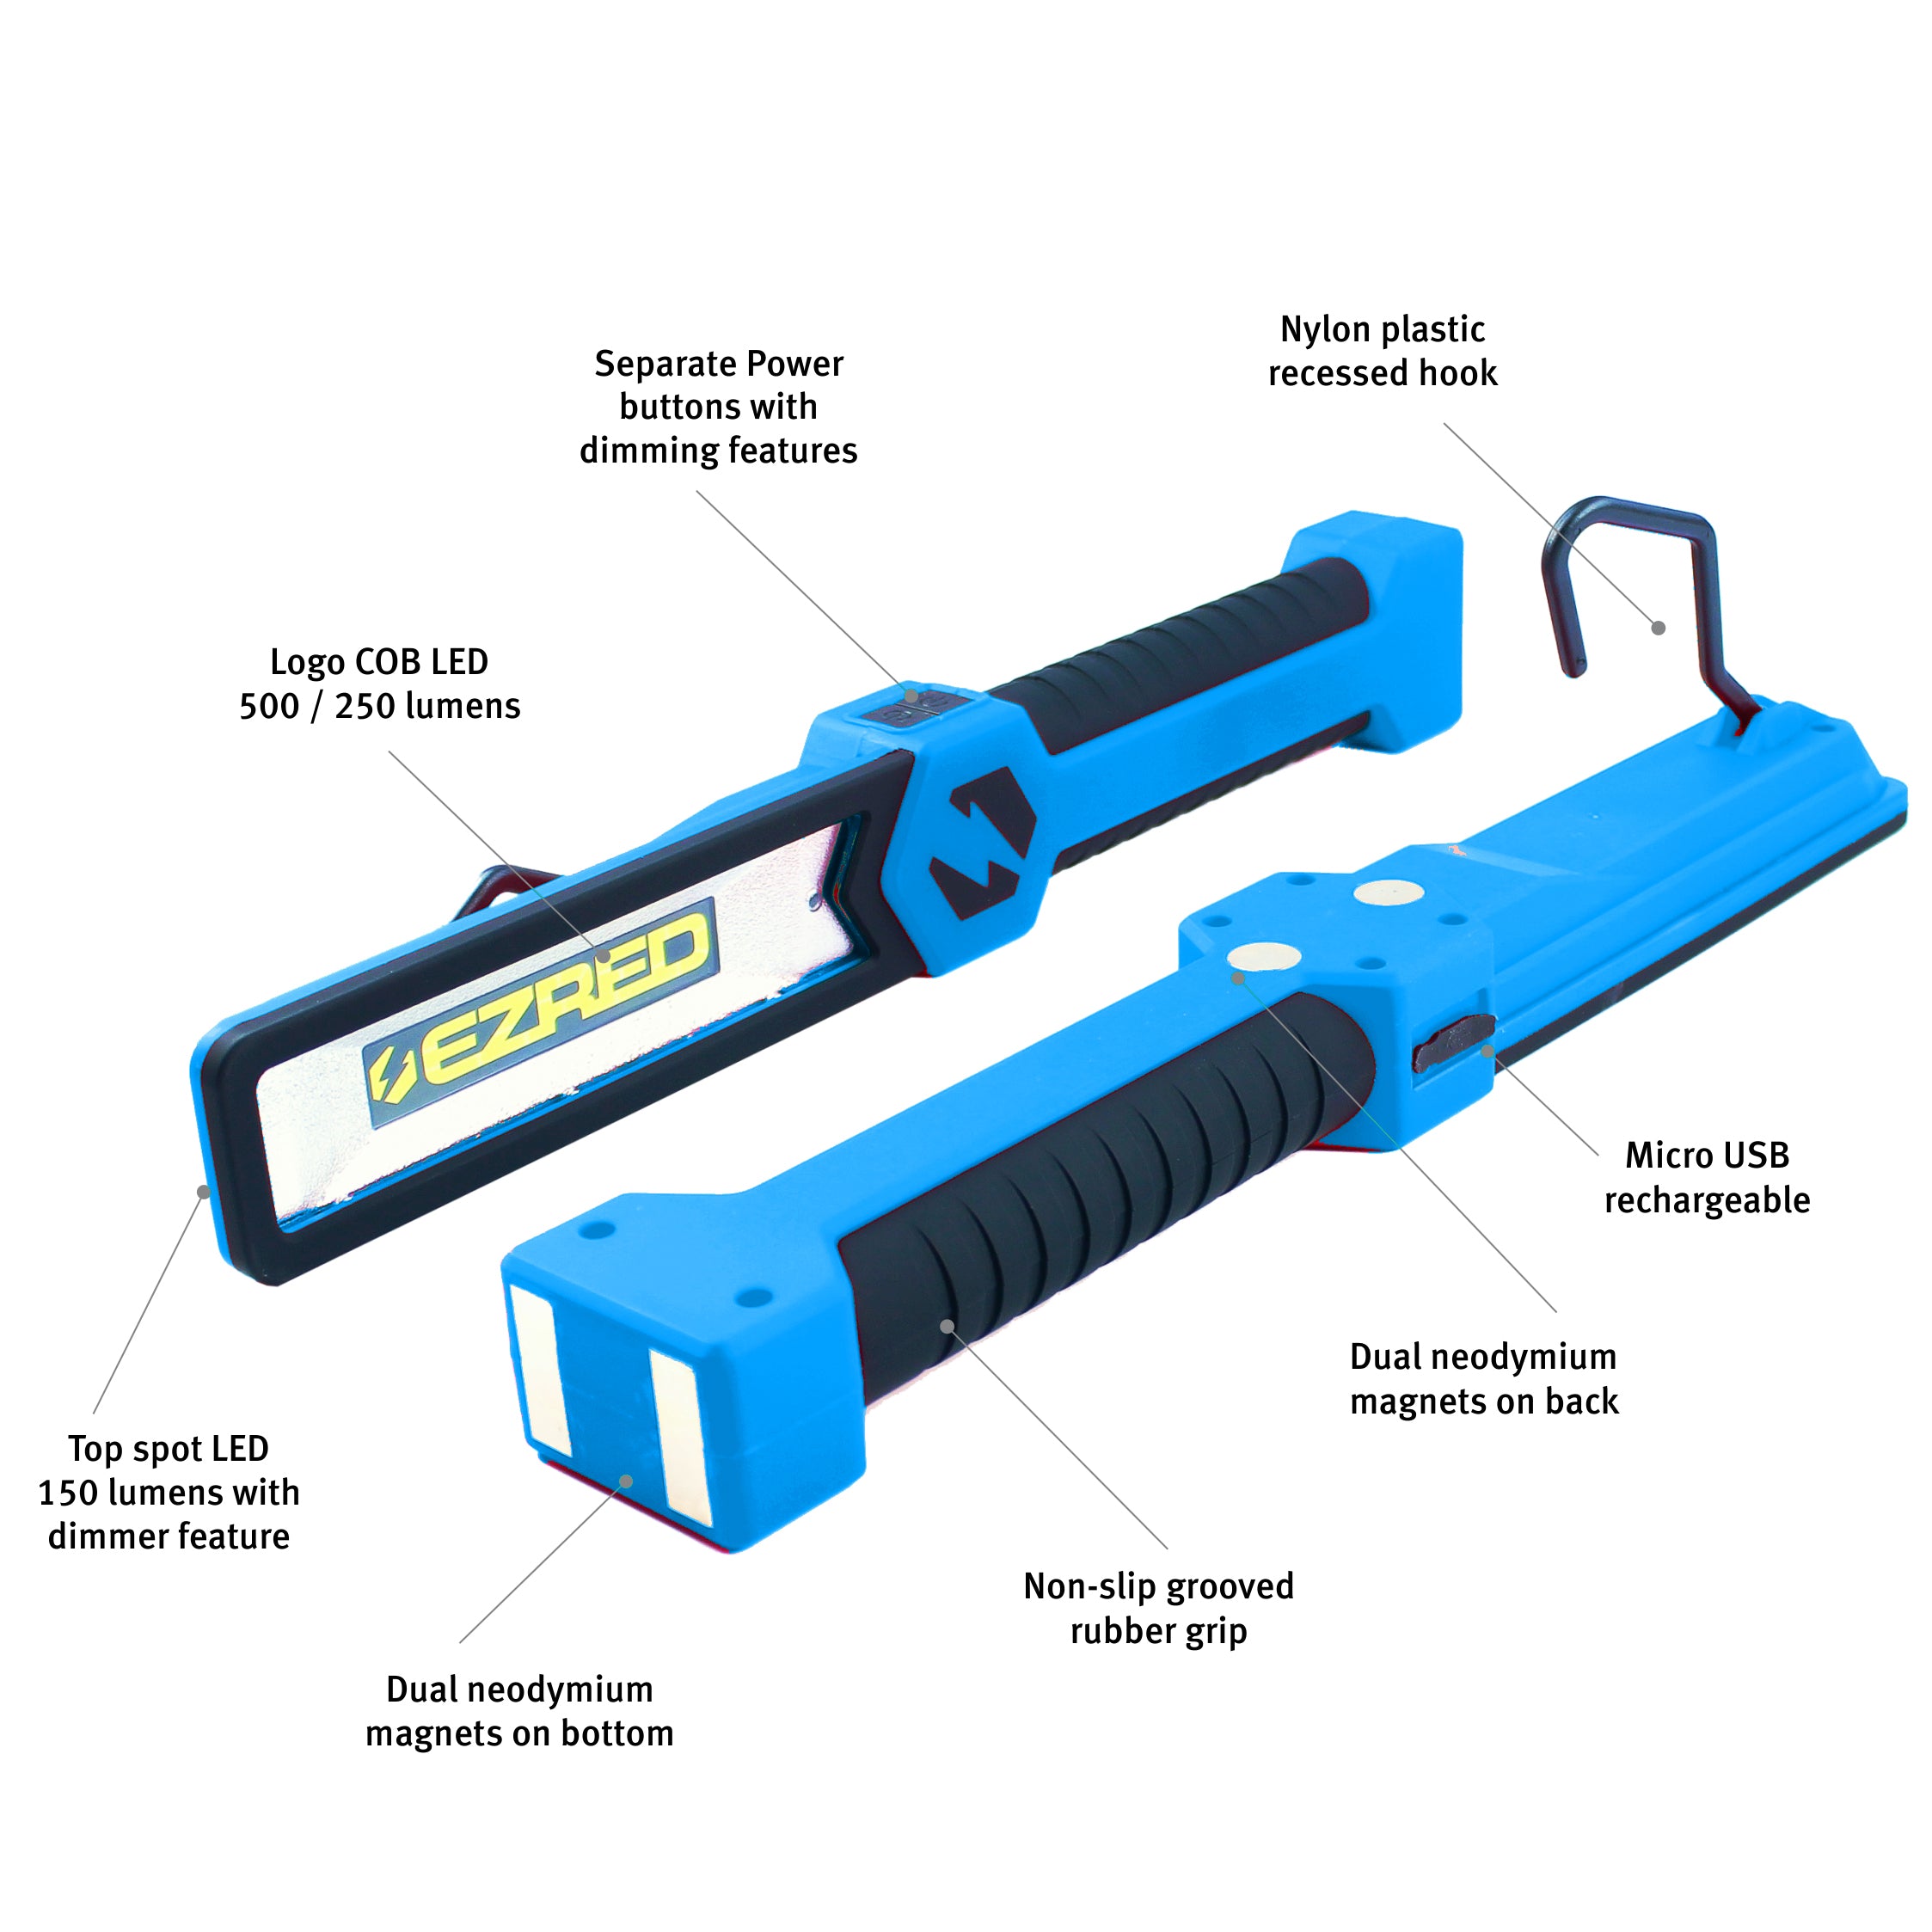 Rechargeable LED Work Light Stick